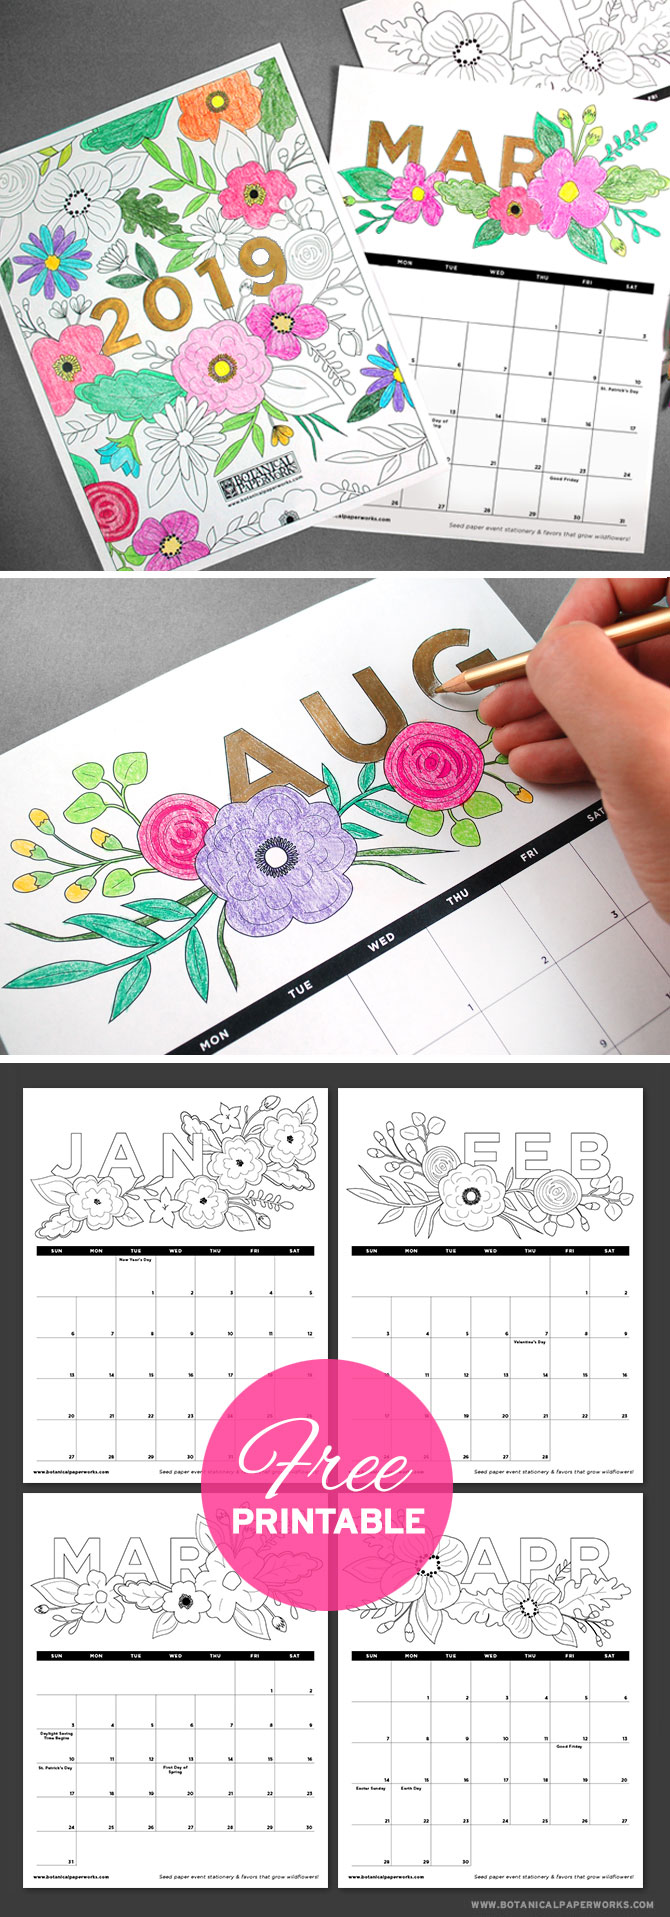 Satisfy the child within and plan for 2019 with this fun Free Printable Coloring Book Calendar! It's filled will floral illustrations that you can color in.